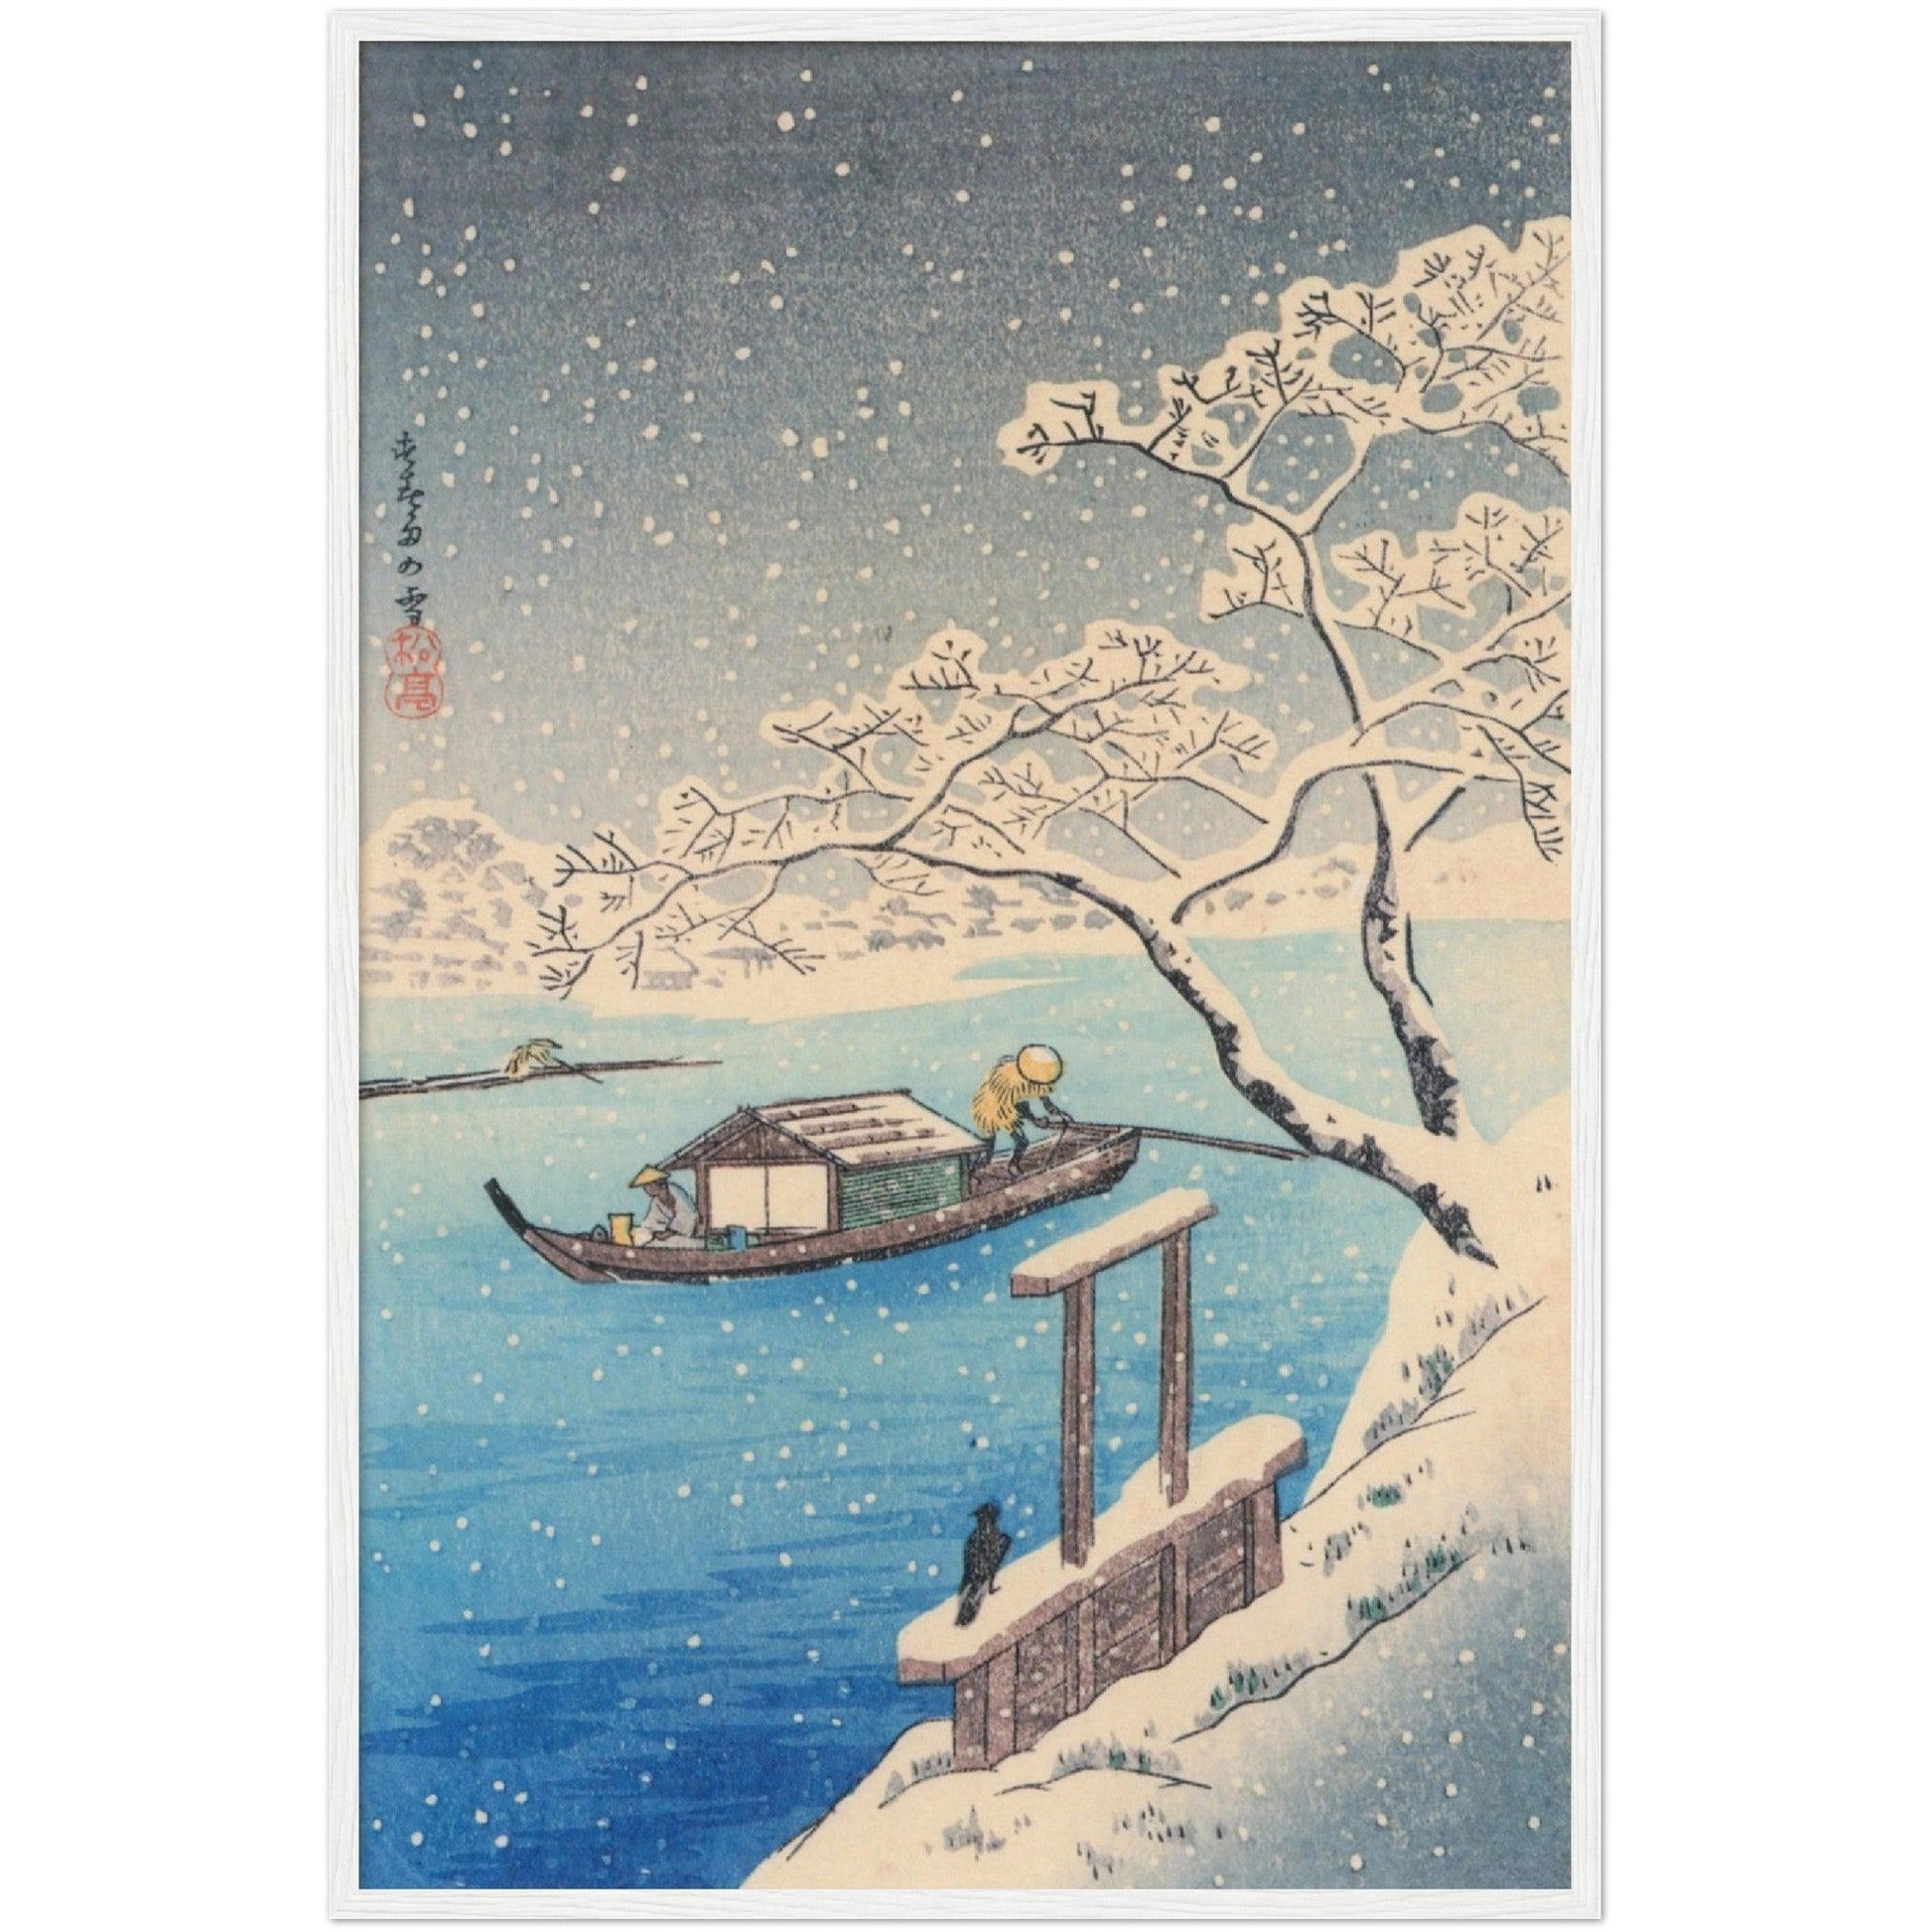 The River Sumida in Snow - By Takahashi Shōtei - Masters in Art